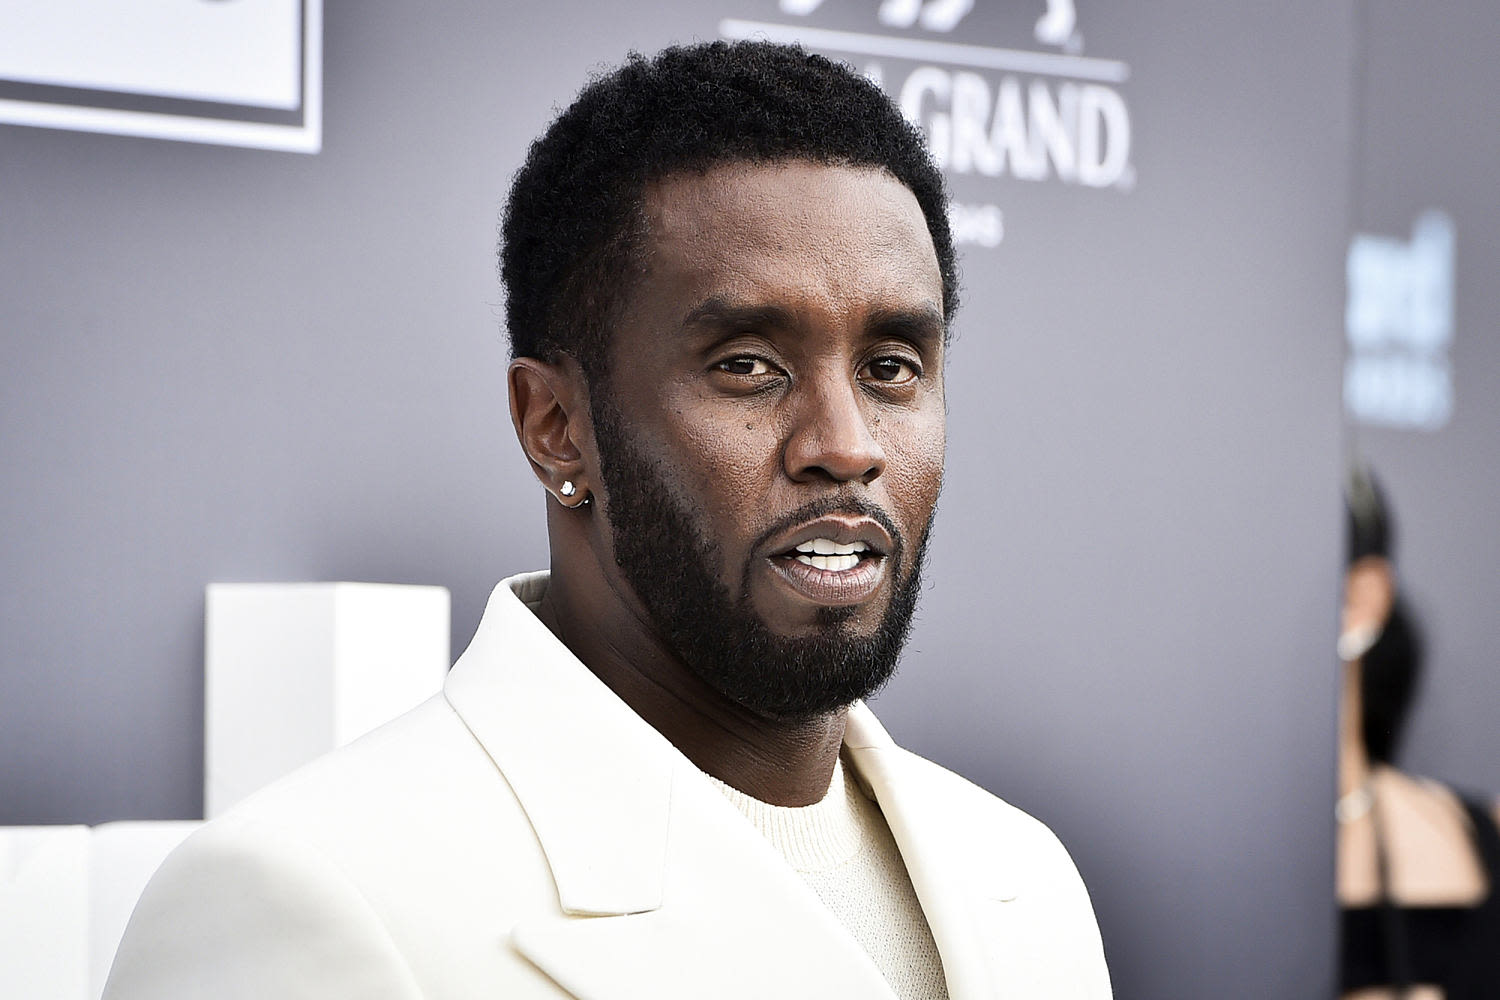 Model sues Diddy, accusing him of drugging and sexually assaulting her